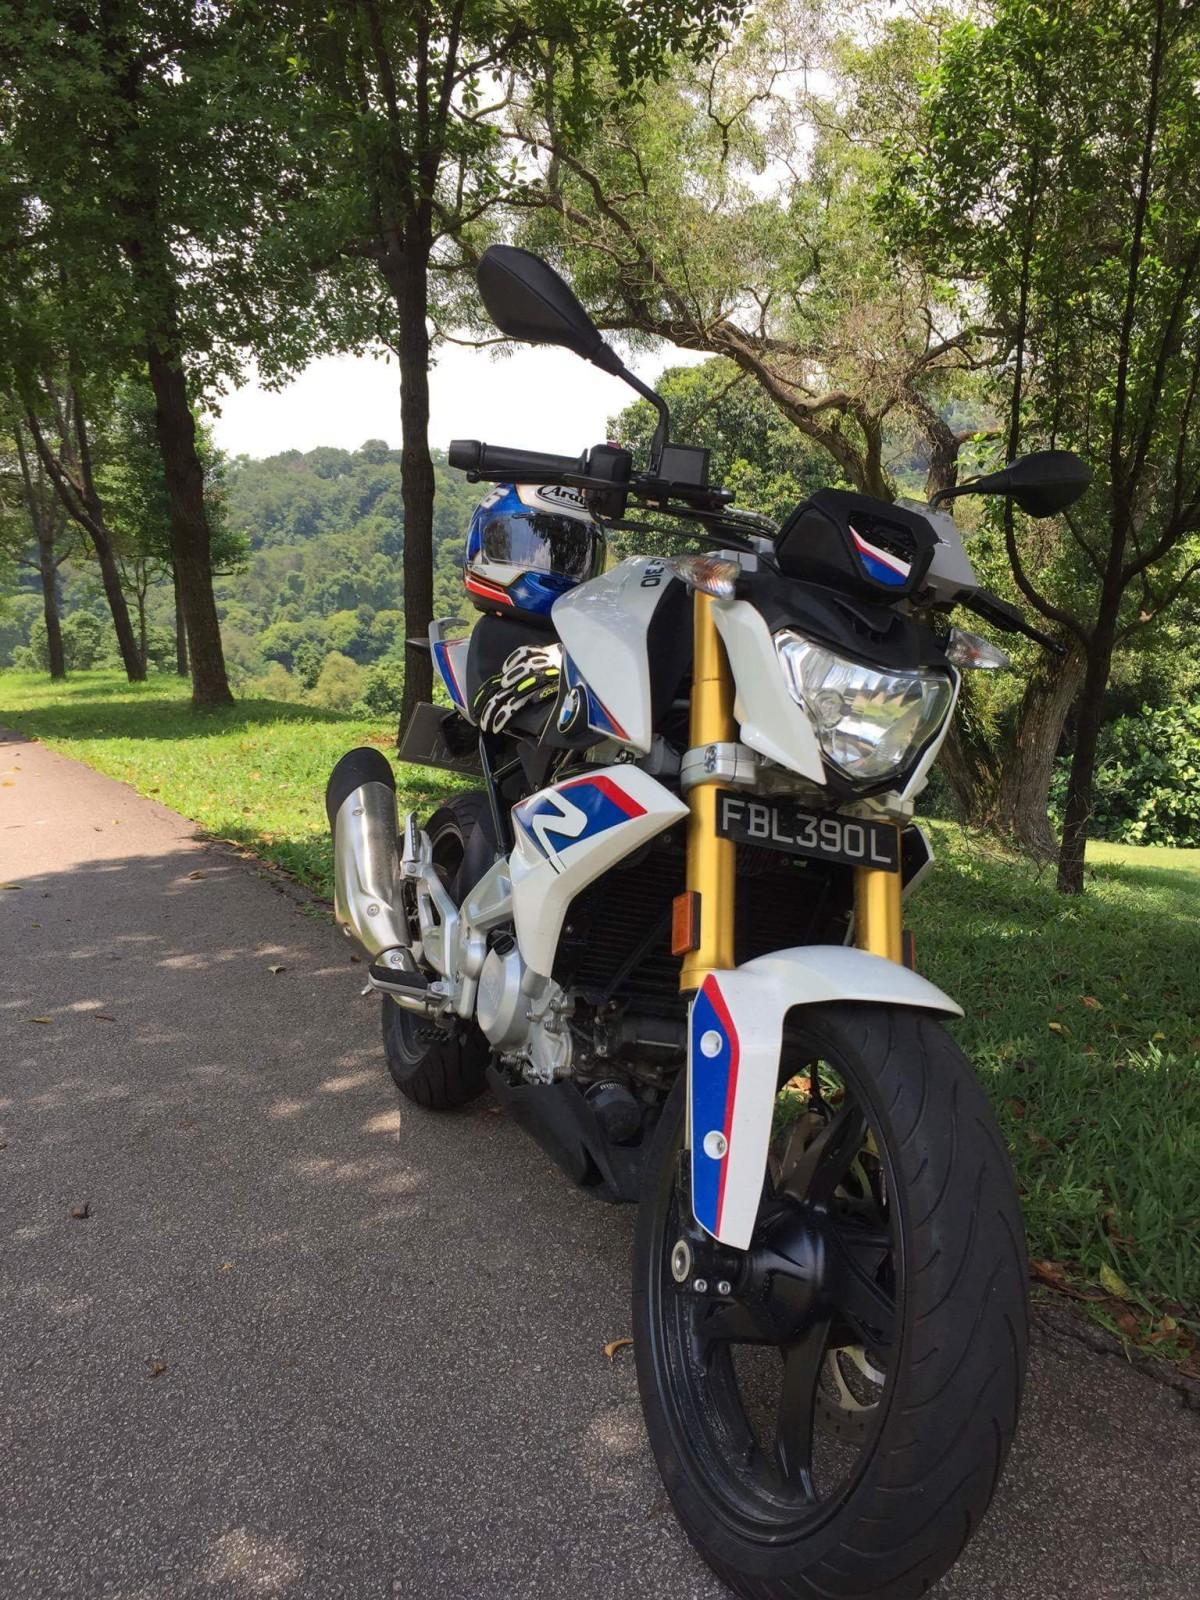 BMW G 310 R User Review, Image, Features And Technical